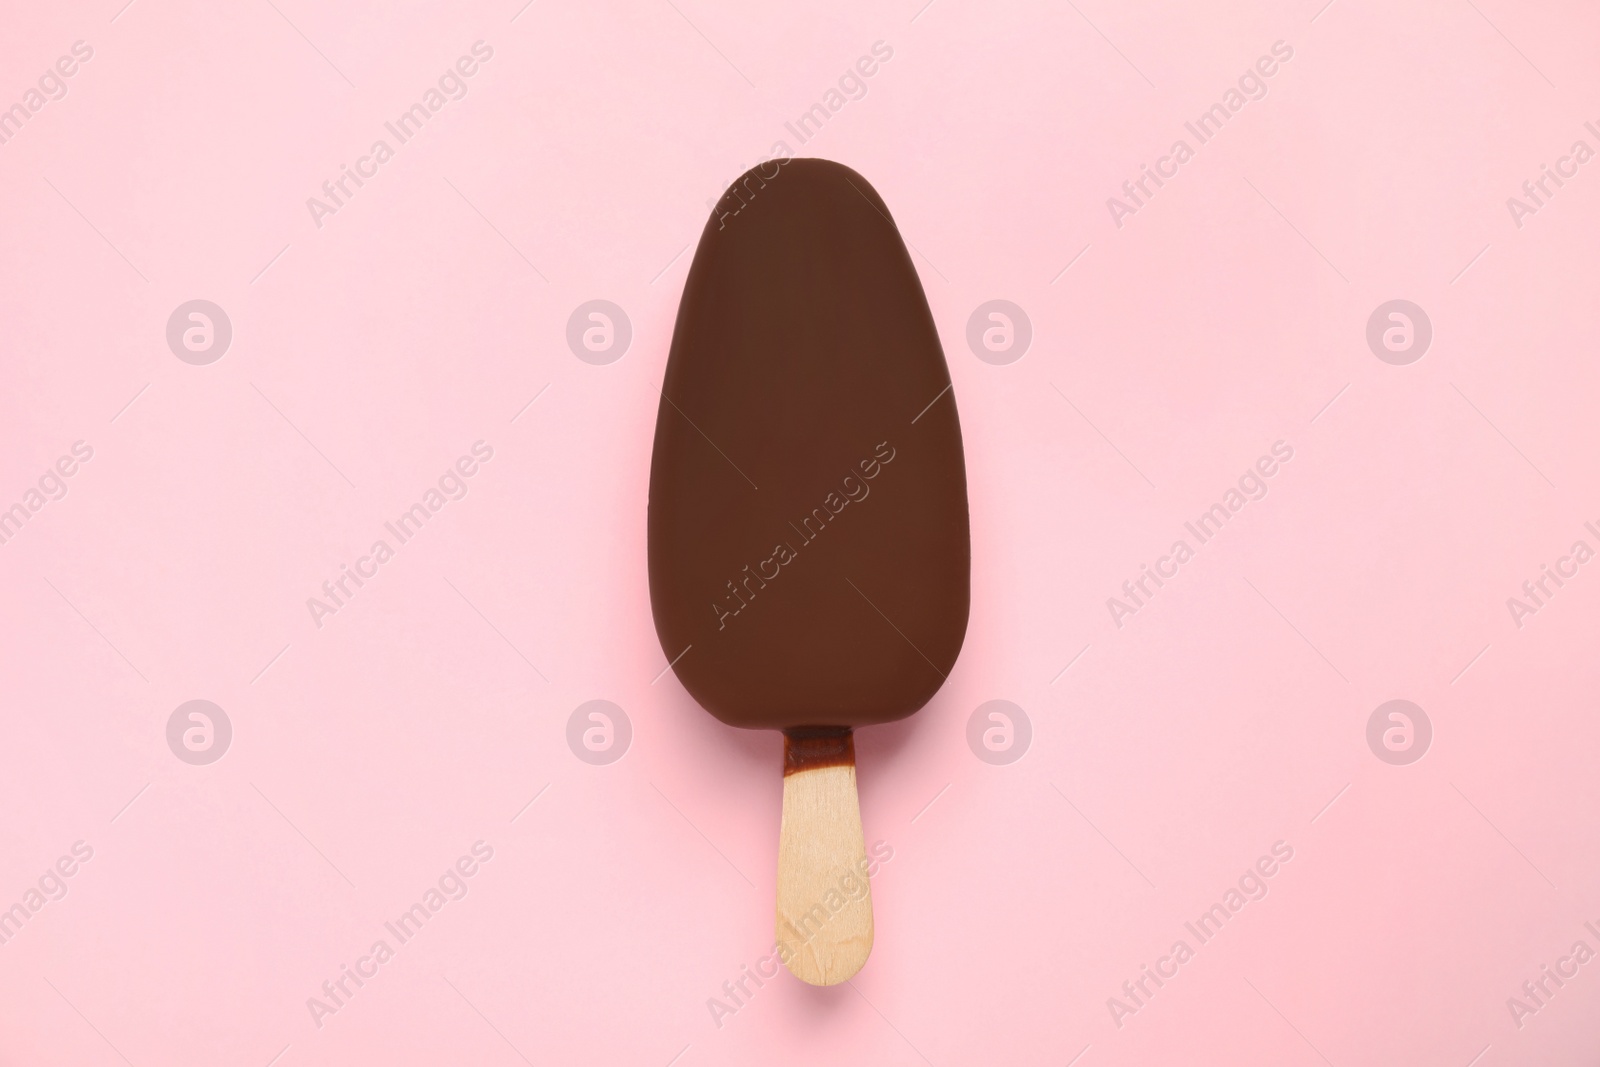 Photo of Ice cream glazed in chocolate on pink background, top view